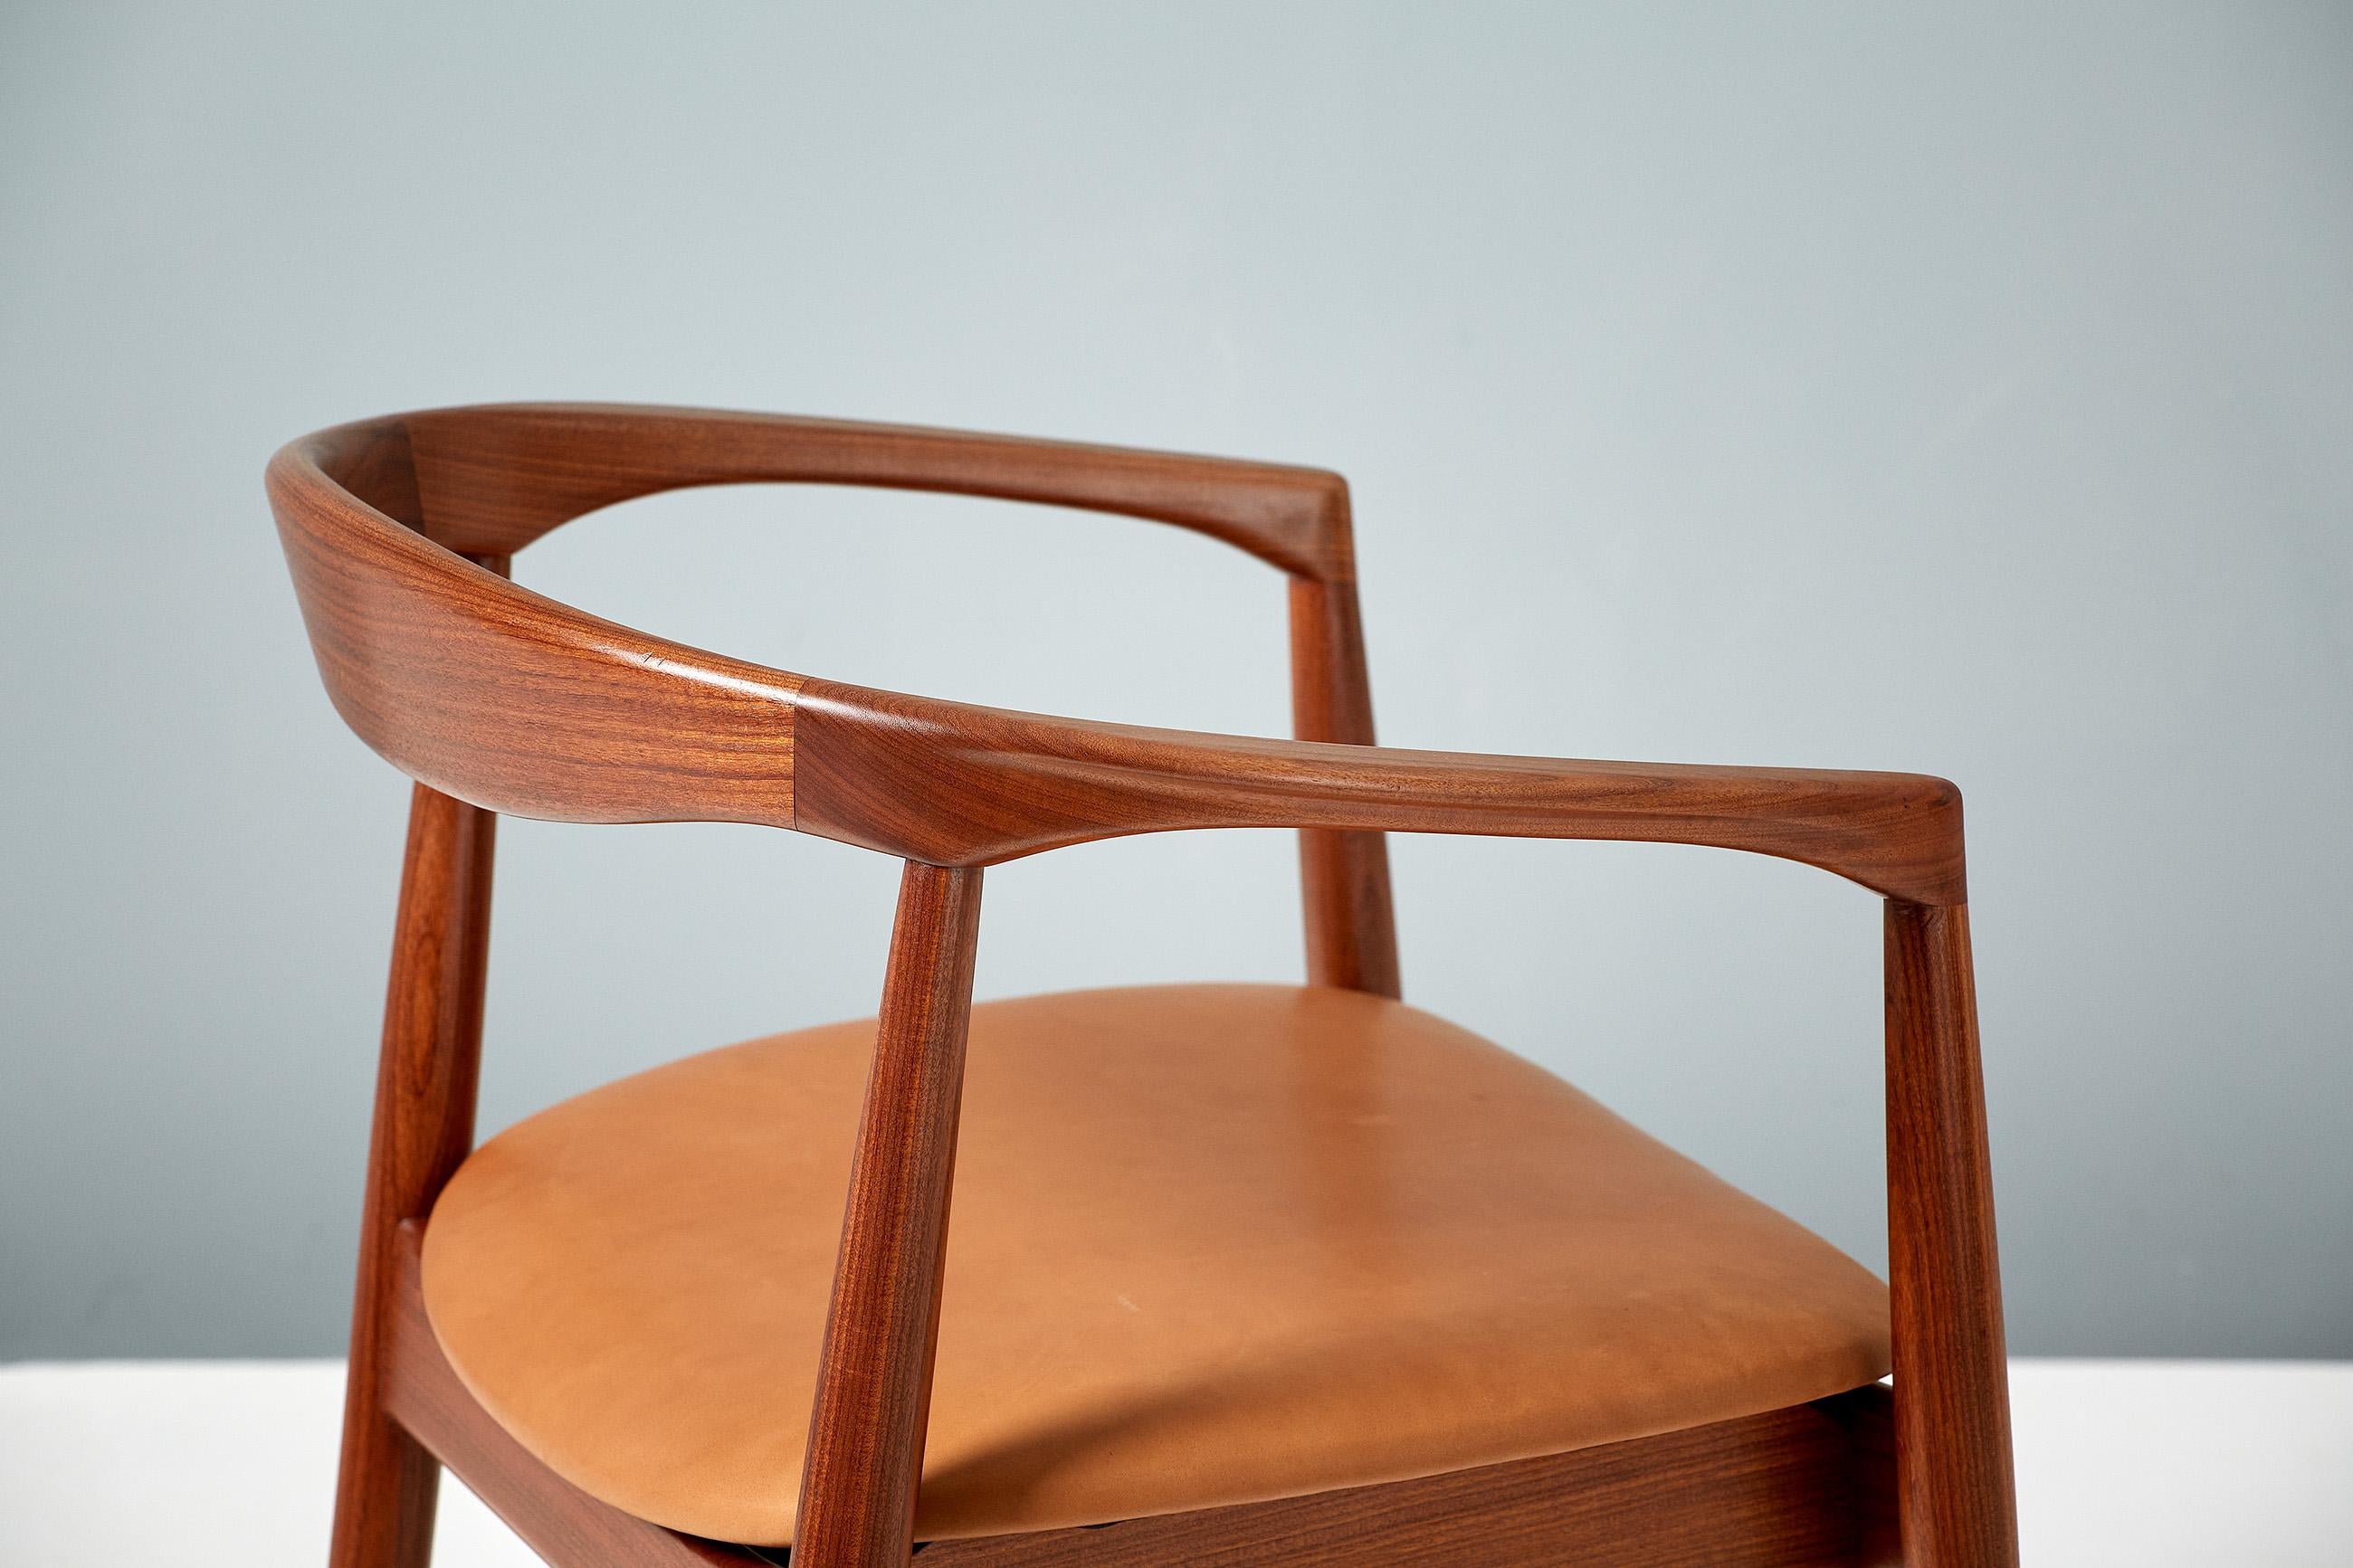 Kai Kristiansen Leather Troja Armchair, c1960 In Excellent Condition For Sale In London, GB